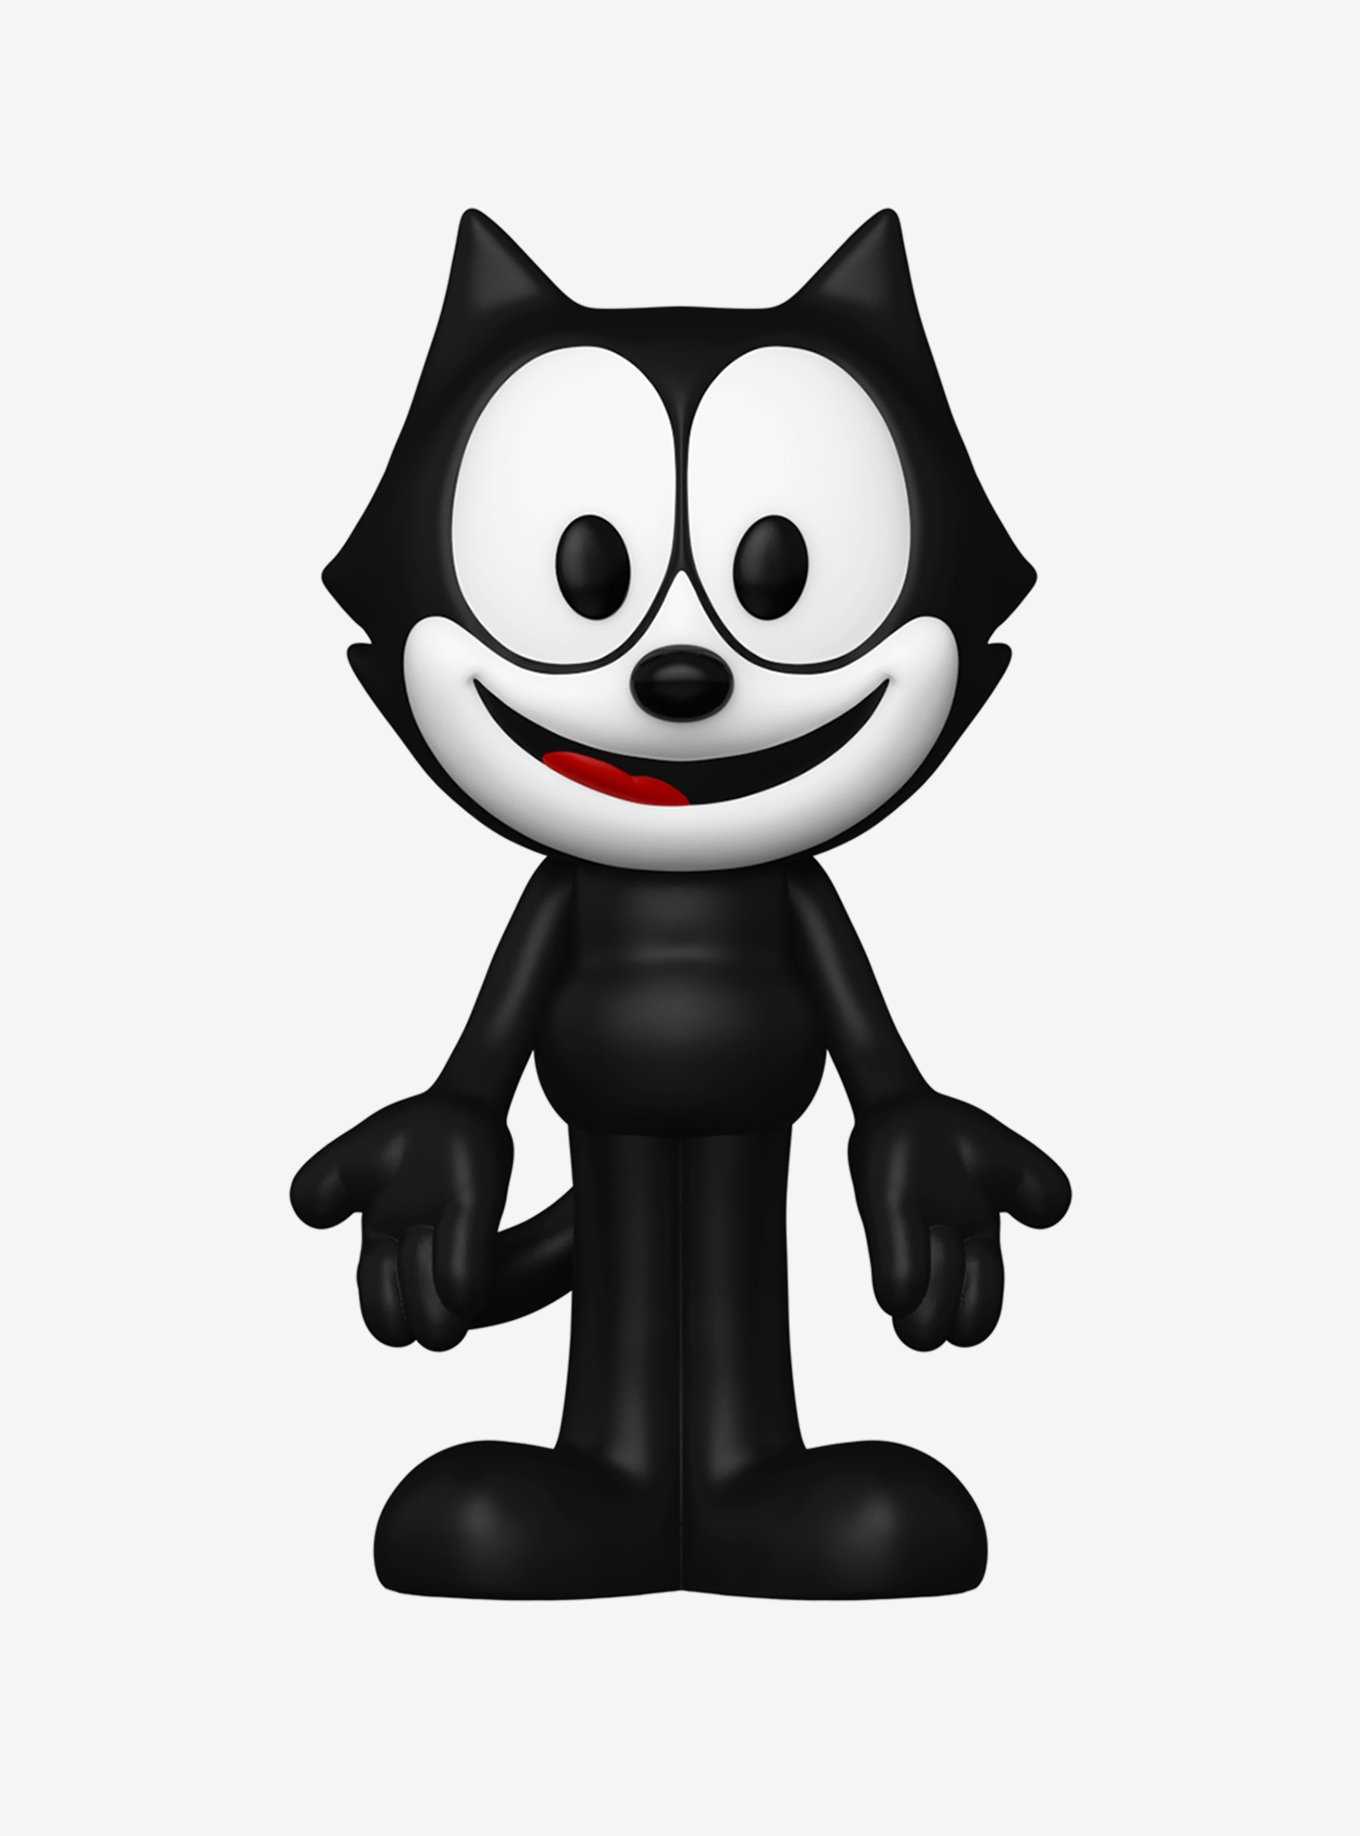 Play NES Felix the Cat (USA) Online in your browser 